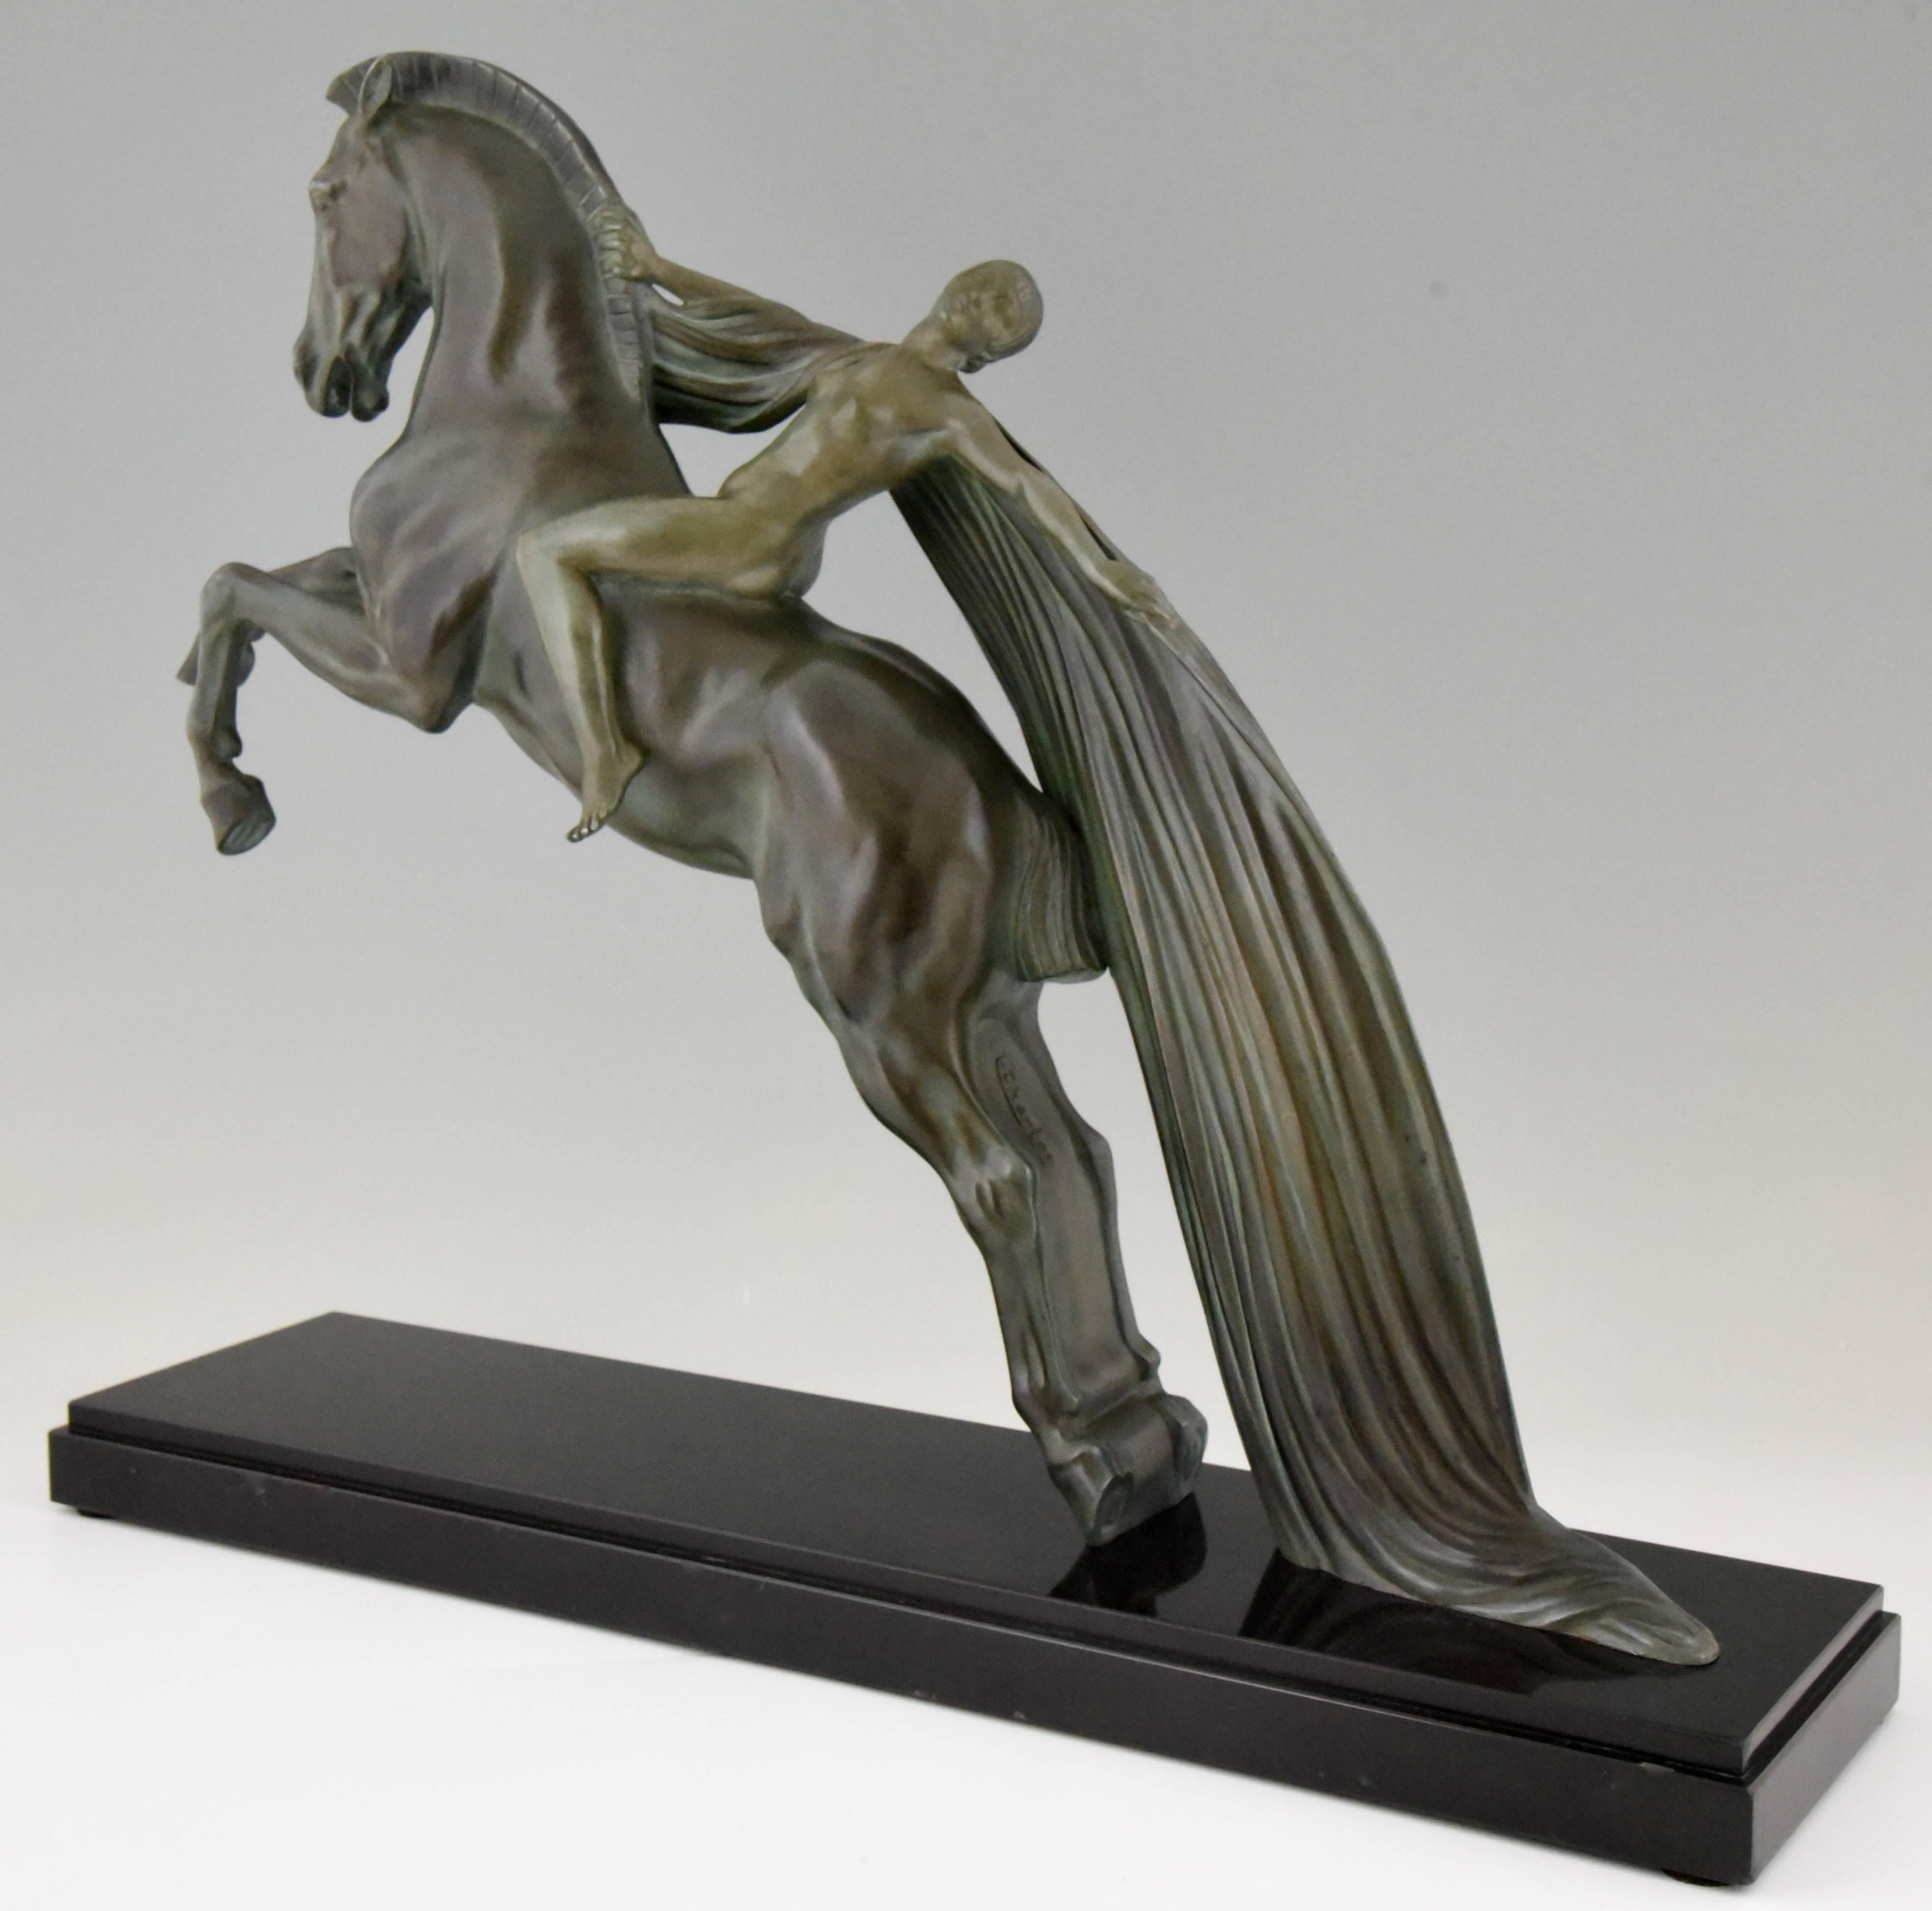 Spectacular Art Deco sculpture of a nude on a rearing horse by the French artist C. Charles cast by Max Le Verrier. 

Signature/ Marks: C. Charles.
Style: Art Deco.
Date: circa 1930.
Material: Art metal with green patina on black marble